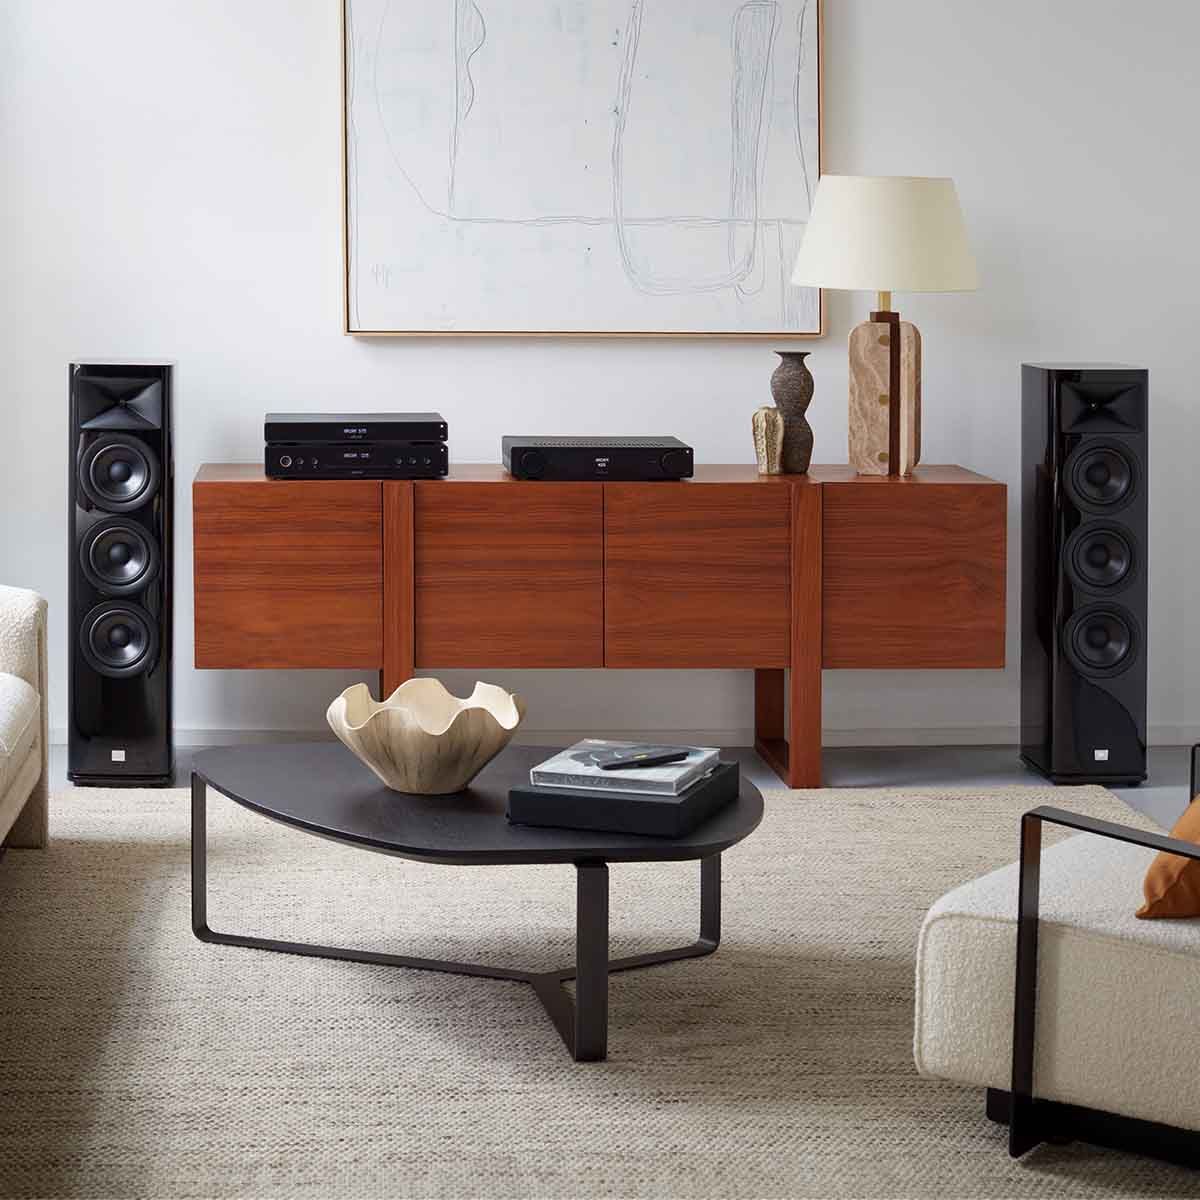 Arcam ST5 Streaming Music Player on credenza with Arcam A25 integrated amplifier and JBL HDI tower speakers